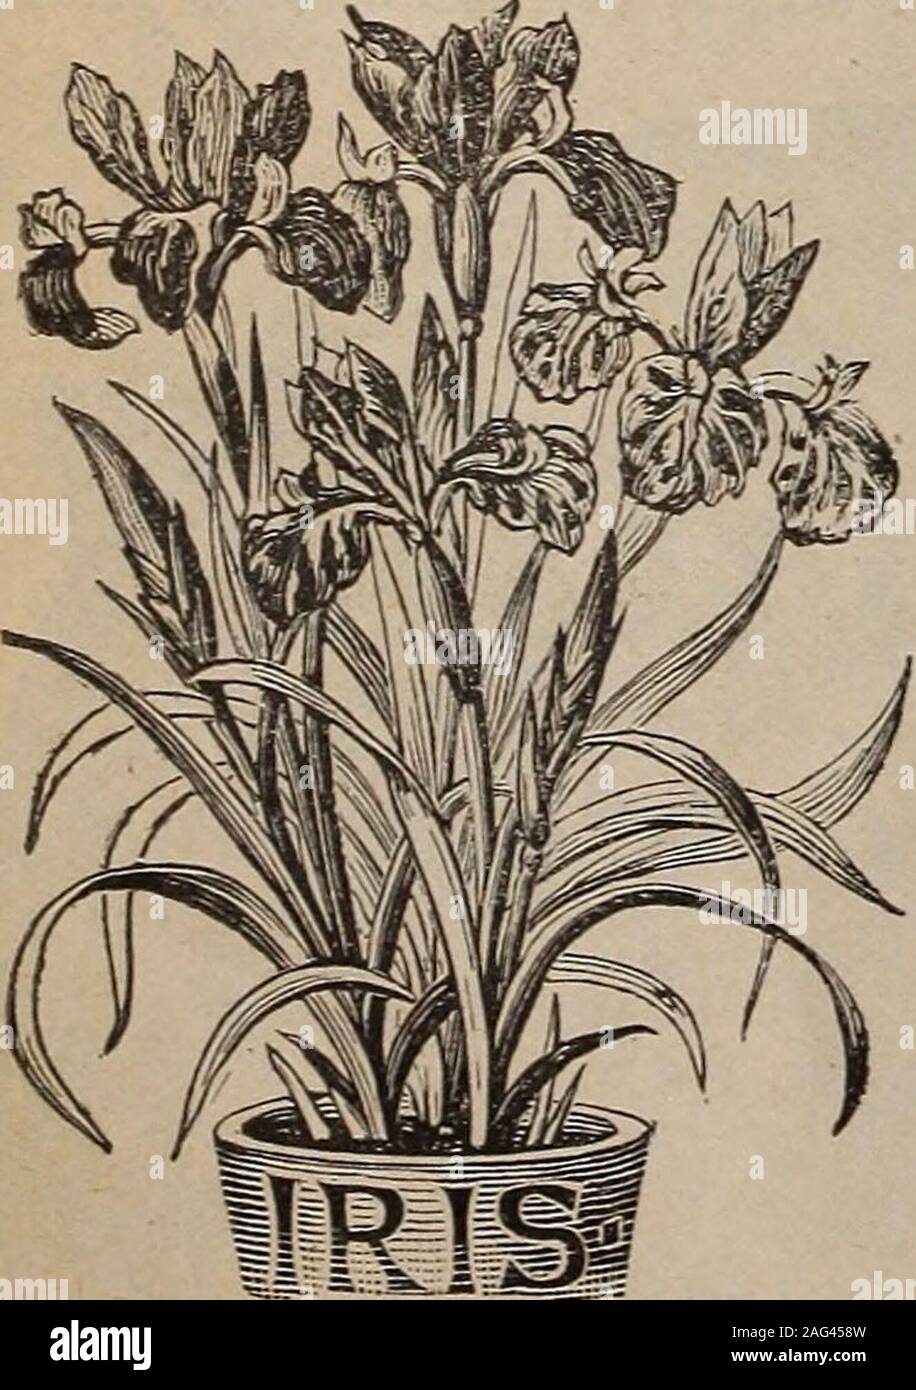 . Childs' catalogue of fall bulbs that bloom : plants shrubs, fruits etc.. violet. CHARLES DICKENS —Light blue. MONT BLANC — Fine,pure white. NIMROD—Purple-black.OTHELLO—Dark blue.Price, 5c each; the 5 for20c; 40c per dozen. Fine Mixed (Many Col-ors), 20c per dozen; $1.50 per100. Star of Bethlehem (Ornithogalum Umbellatum) The good old Star of Bethlehem is a lovely flower. ItBoon forms mats of narrow, silver-striped foliage, dotted inearly summer with a profusion of dainty white stars. Makesa neat edging for herbaceous borders, and is perfectly hardy.It can be grown in pots, flowering well dur Stock Photo